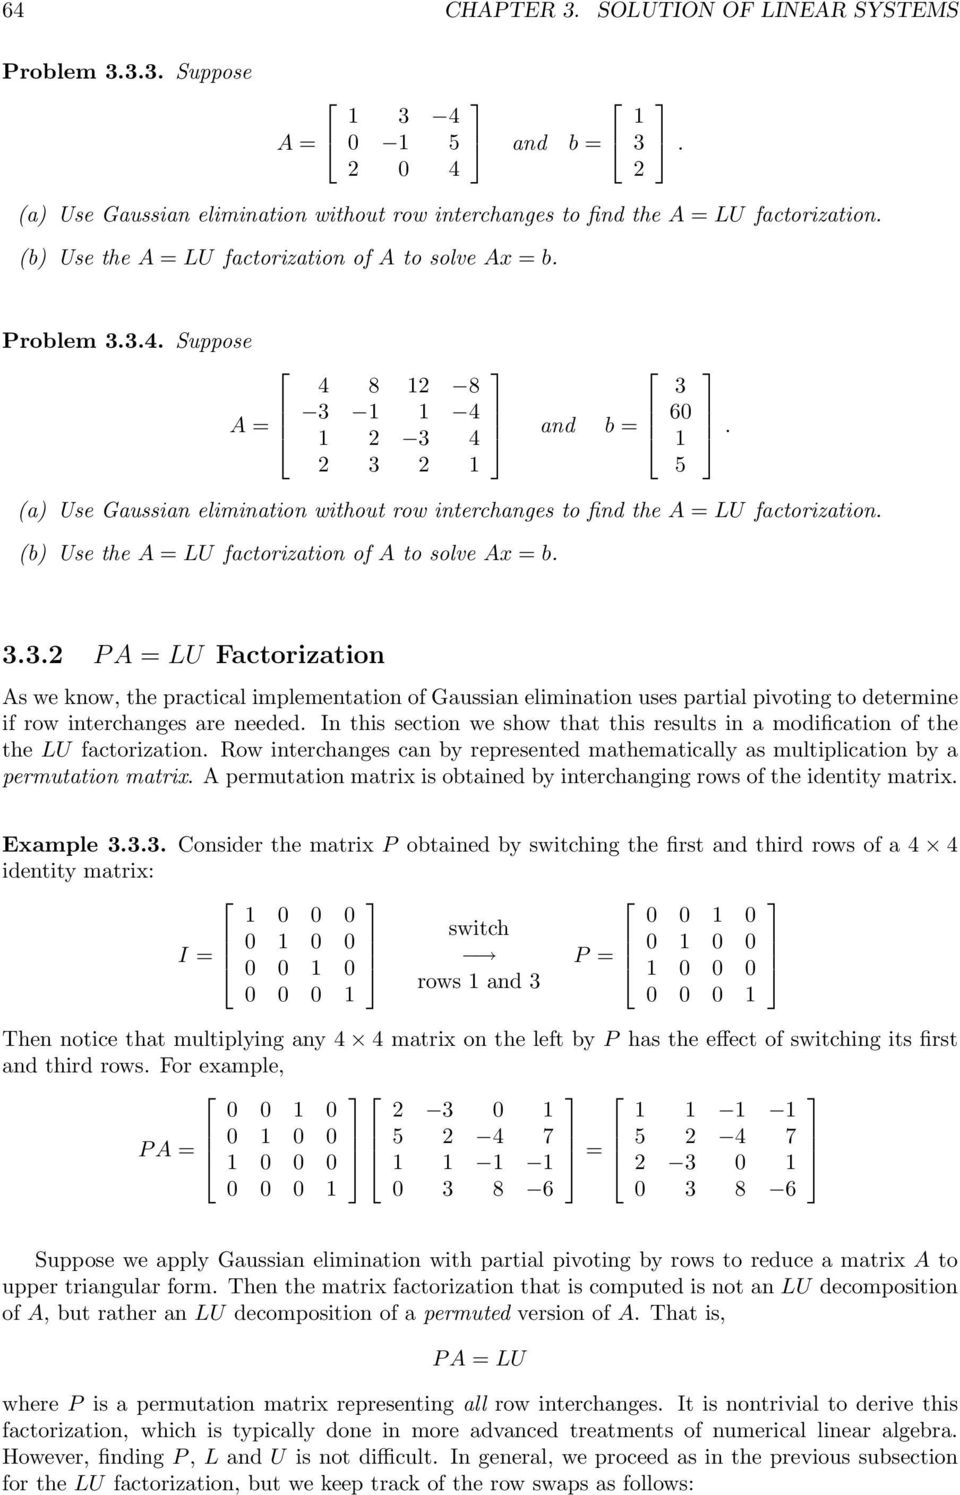 Suppose A = 4 8 2 8 3 4 2 3 4 2 3 2 and b = (a) Use Gaussian elimination without row interchanges to find the A = LU factorization. (b) Use the A = LU factorization of A to solve Ax = b. 3 60 5. 3.3.2 P A = LU Factorization As we know, the practical implementation of Gaussian elimination uses partial pivoting to determine if row interchanges are needed.